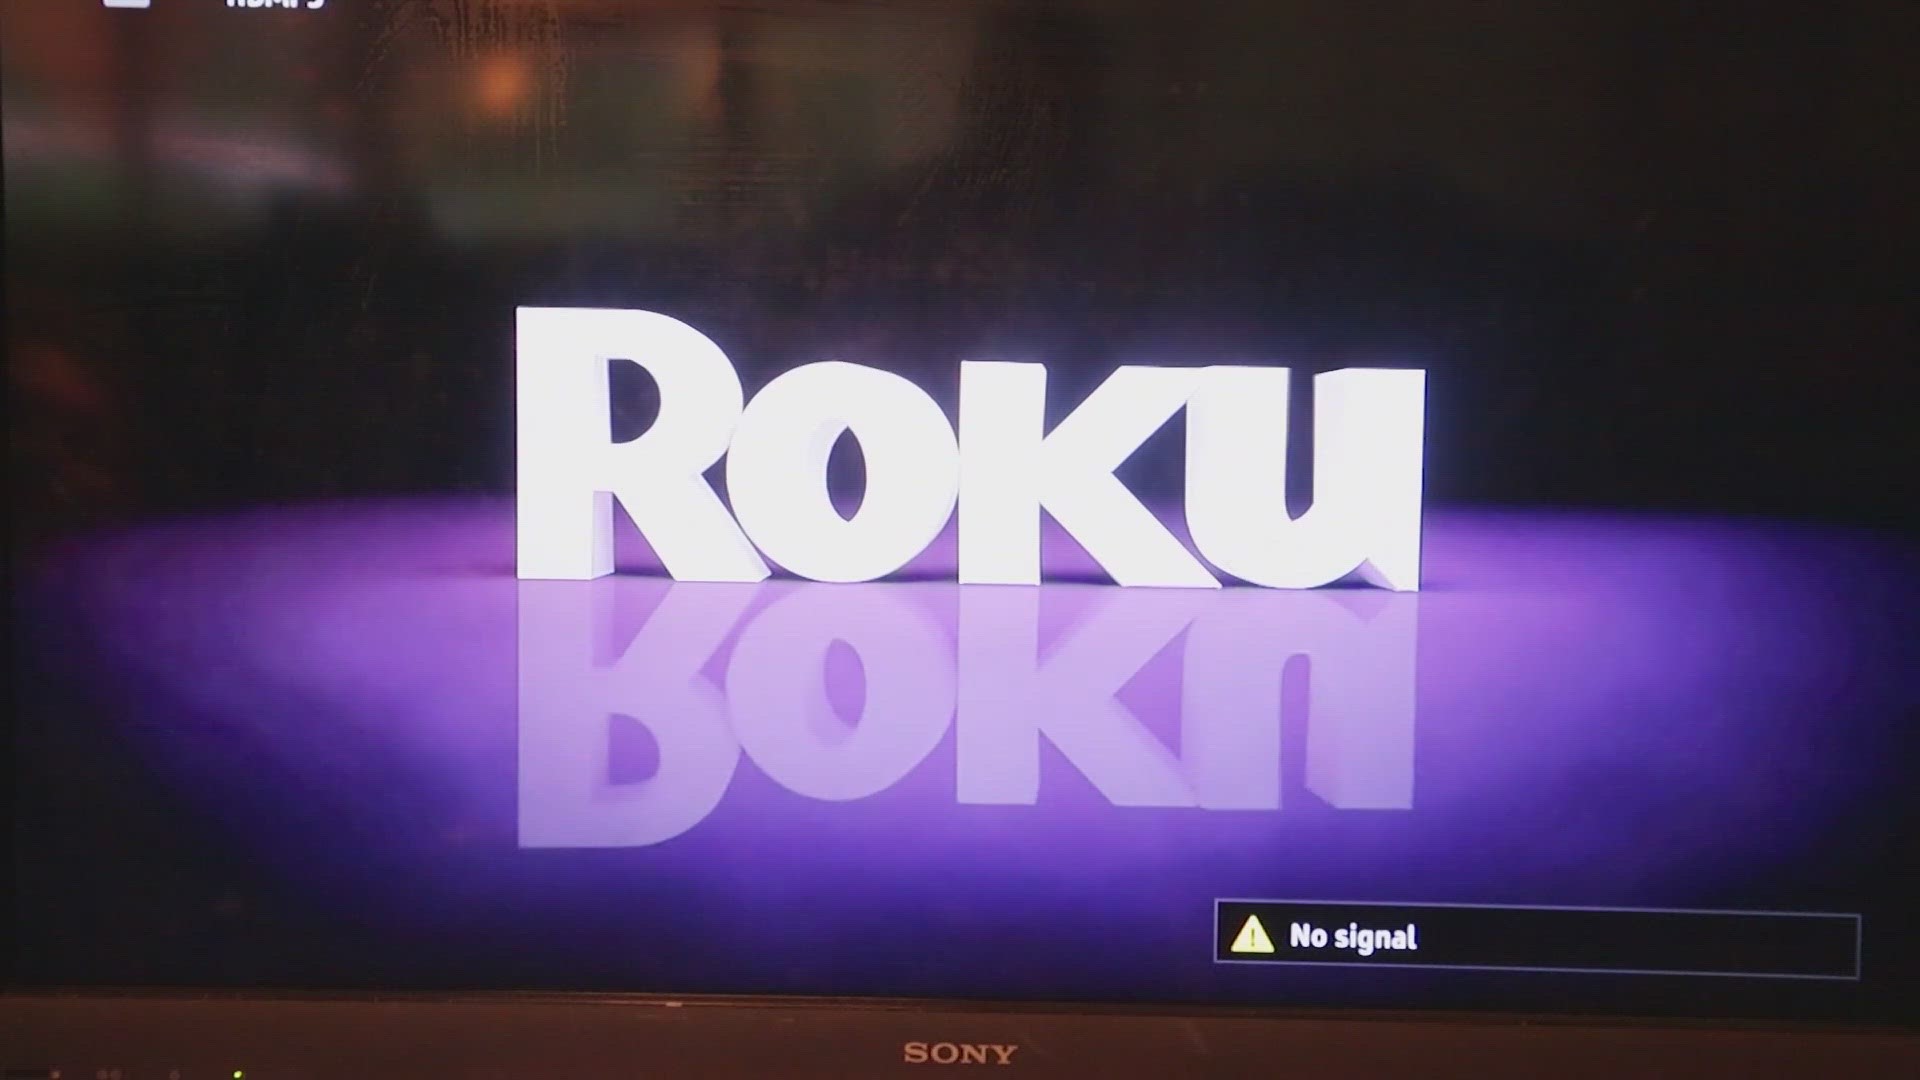 This is the second data breach for Roku this year.